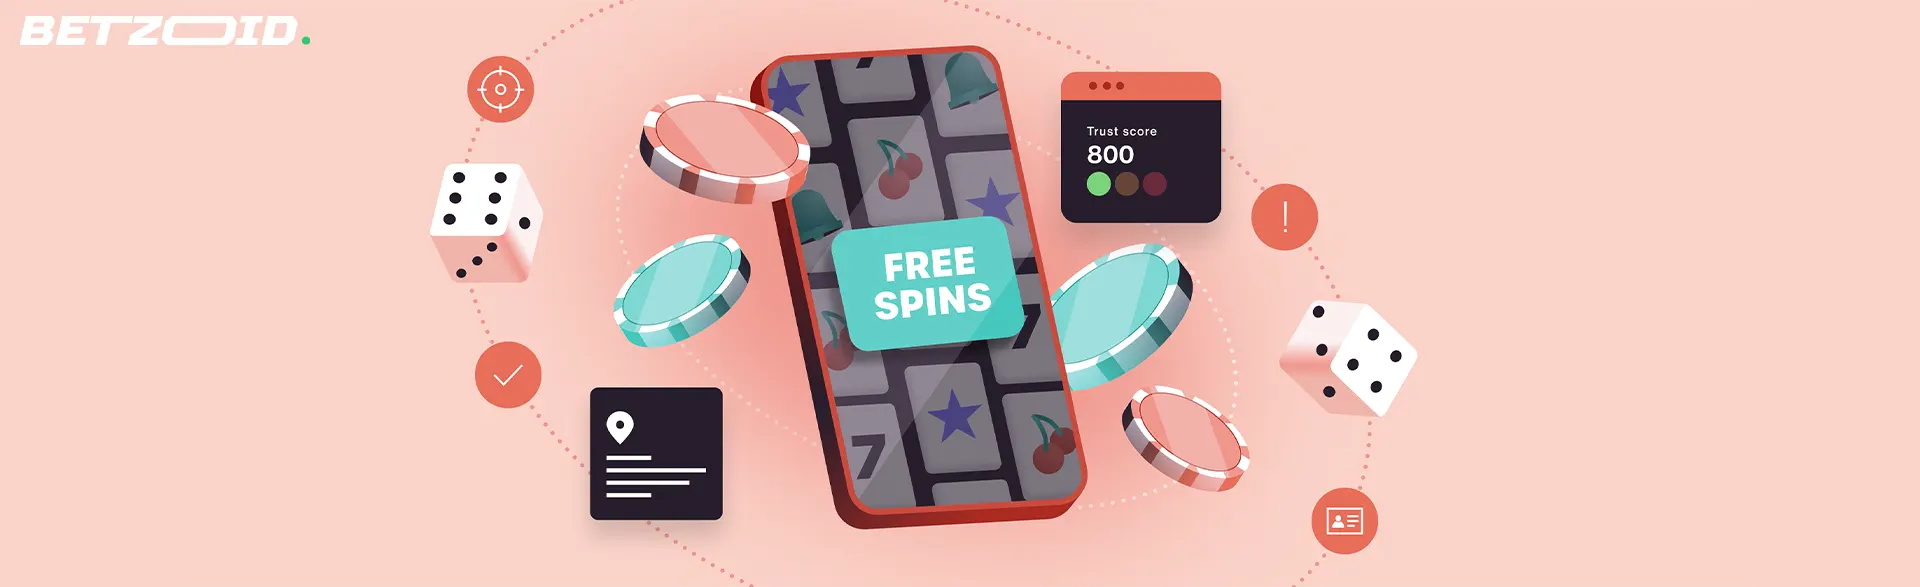 Casino chips, dice and freespins on your smartphone screen at casinos with signup bonuses in Canada.